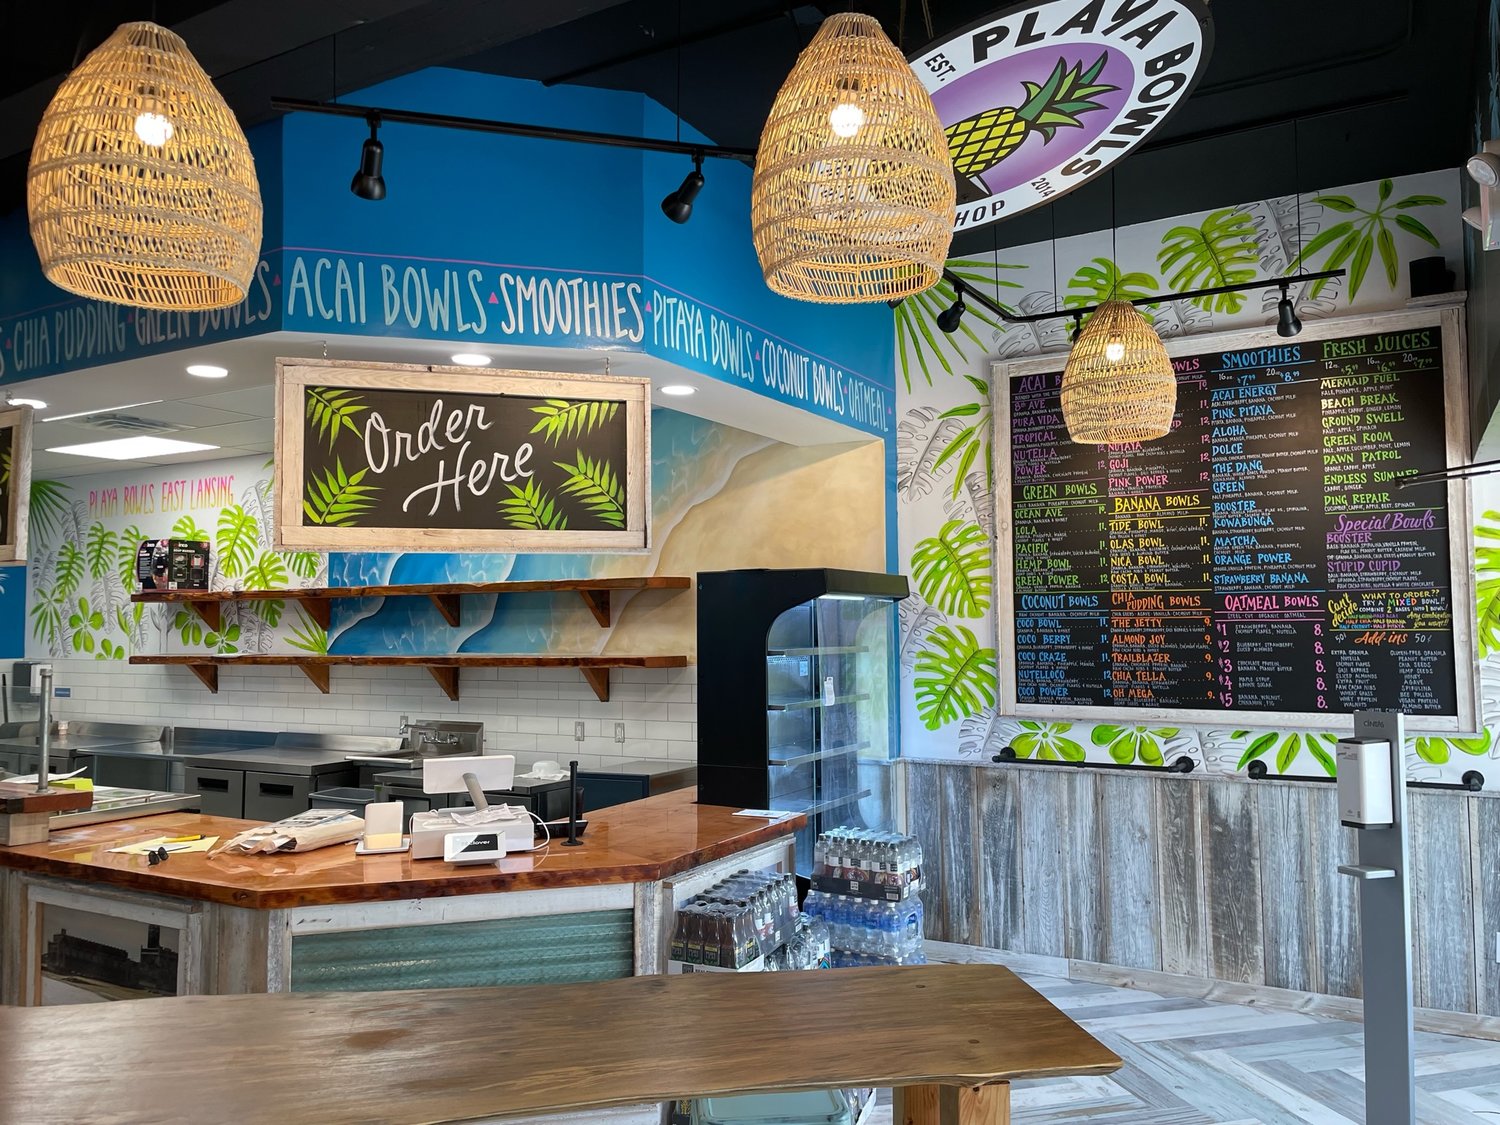 Playa Bowls, 225 E. Grand River Ave., East Lansing brings a tropical slice of summer to downtown with its açaí shop, opening Saturday (June 18).